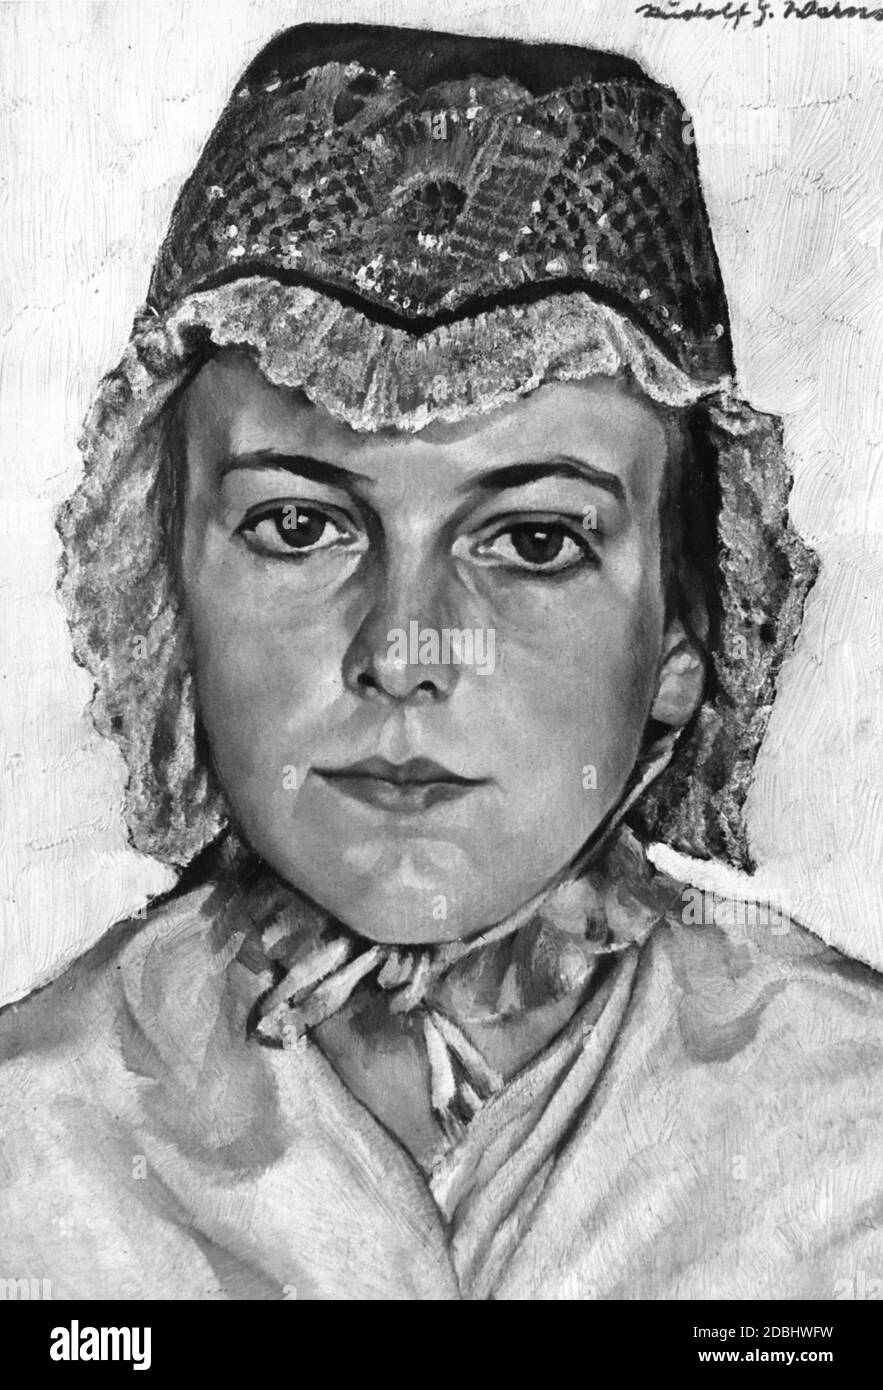 'The painting ''Maedchen mit schlesisscher Haube'' by Rudolf G. Werner from Lichterfelde. A portrait of a young woman wearing a Silesian folk costume.' Stock Photo